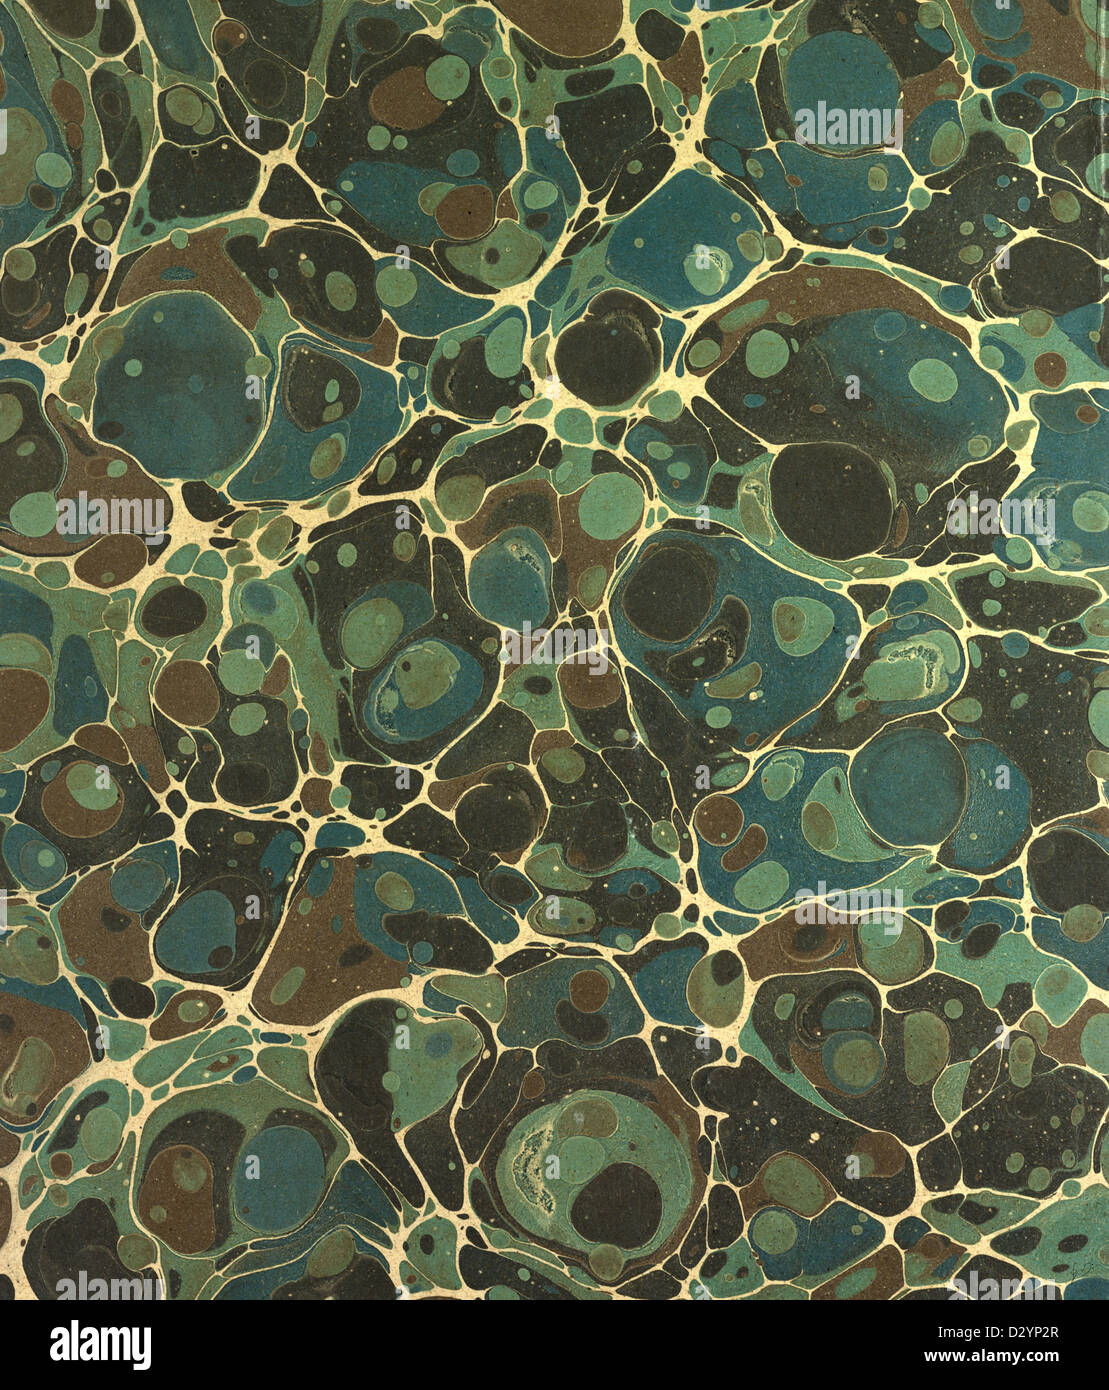 PATTERN, Green and Blue. Paper marbling Stock Photo